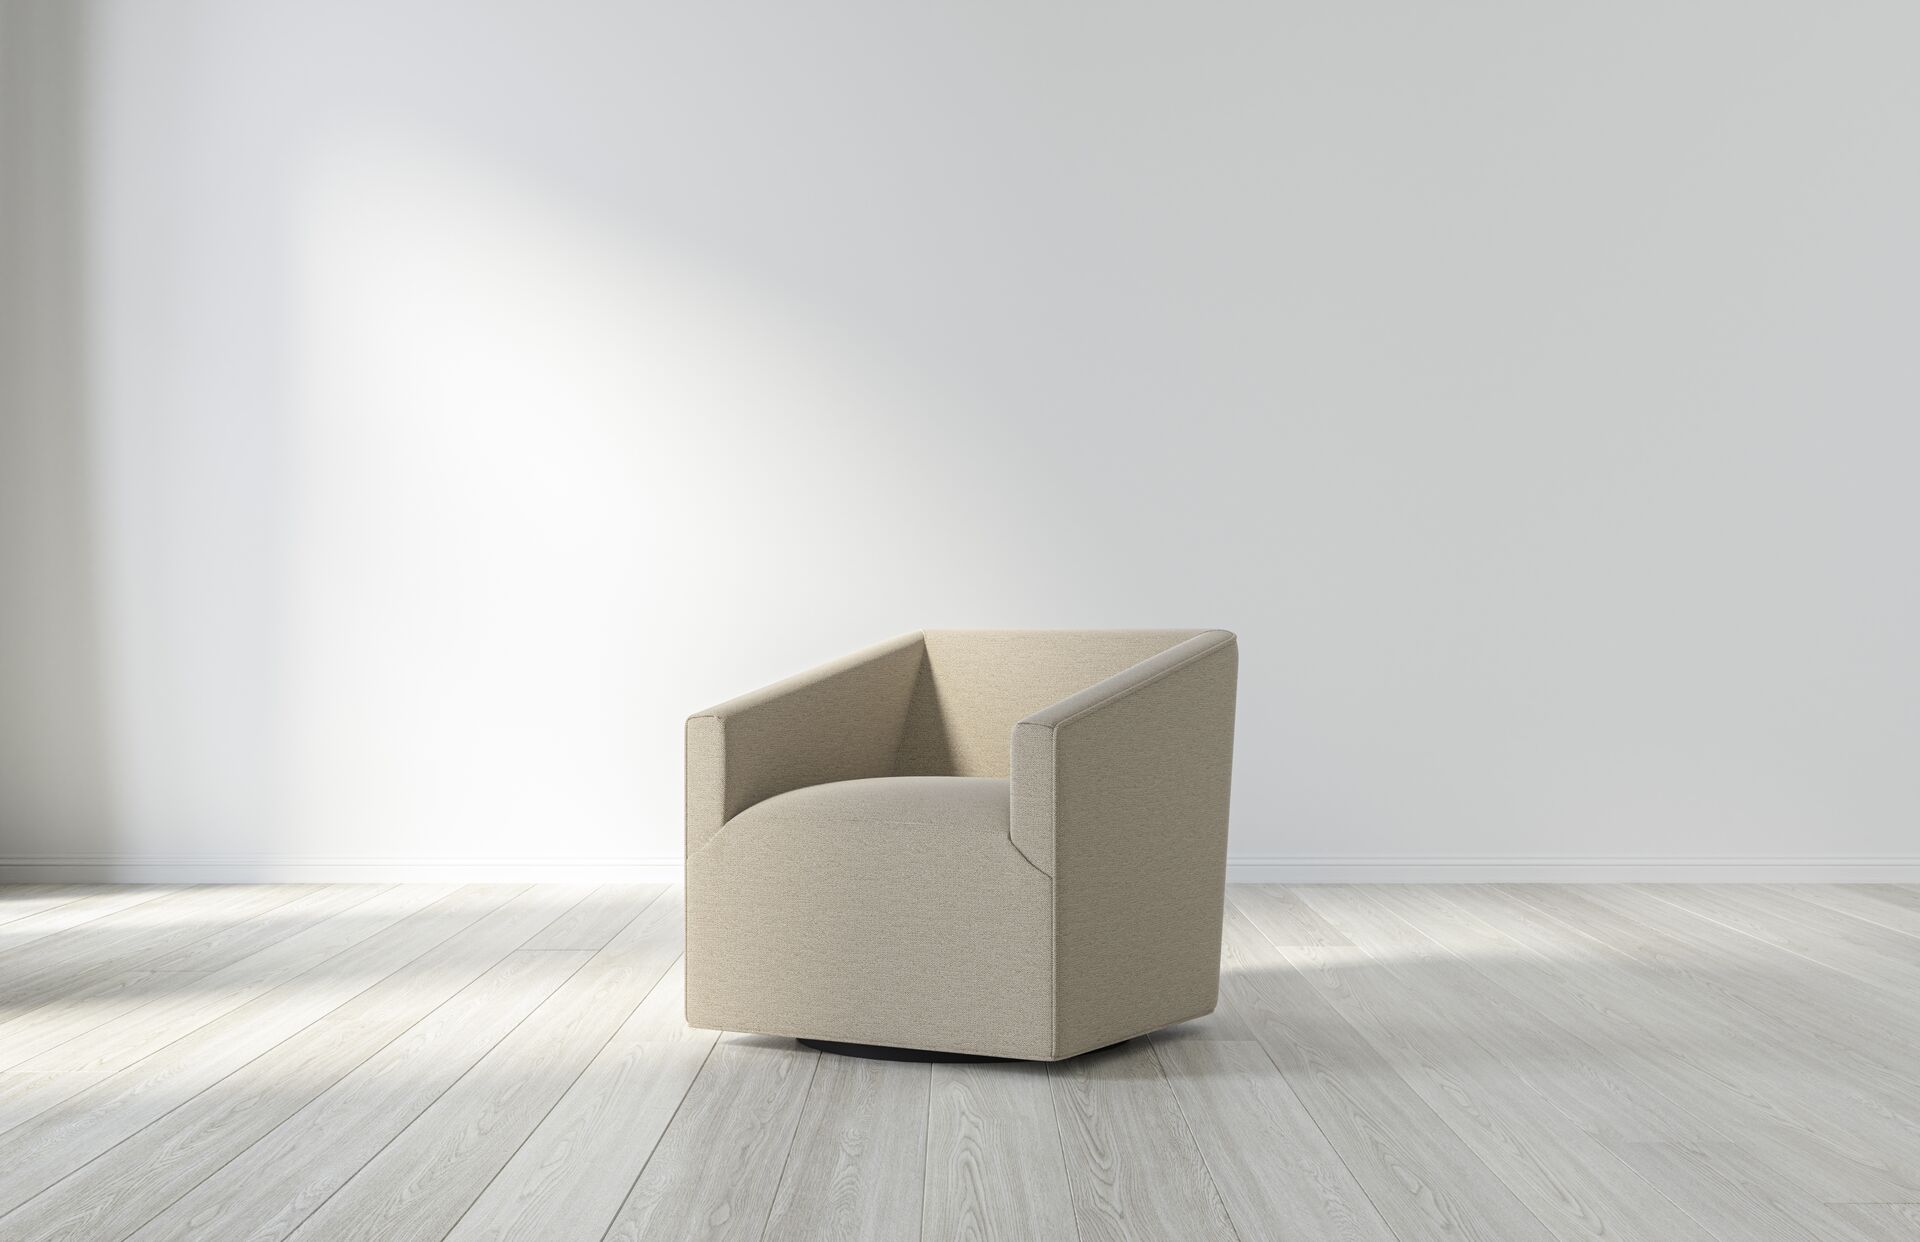 The Saatva Como Swivel Chair - a modern and eye-catching bedroom chair with clean lines.